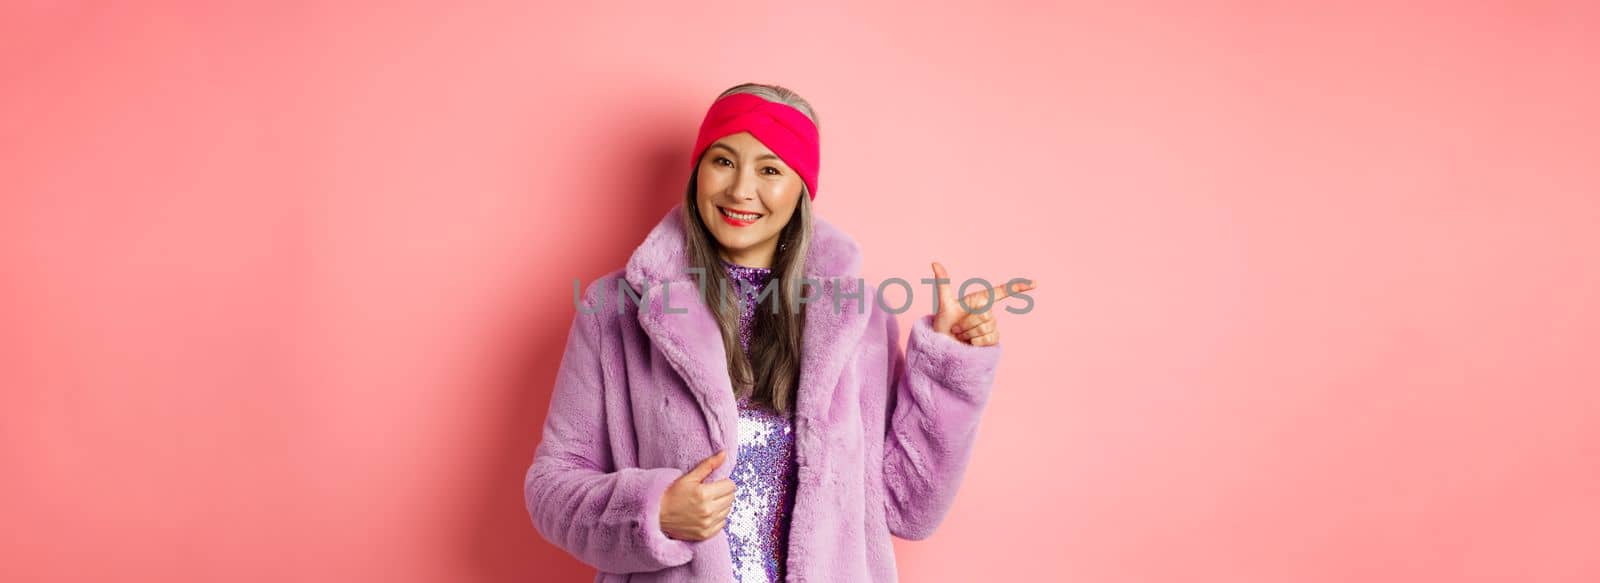 Fashion and shopping concept. Stylish senior asian woman pointing finger left at promotion deal, smiling at camera, suggesting special offer, standing against pink background.